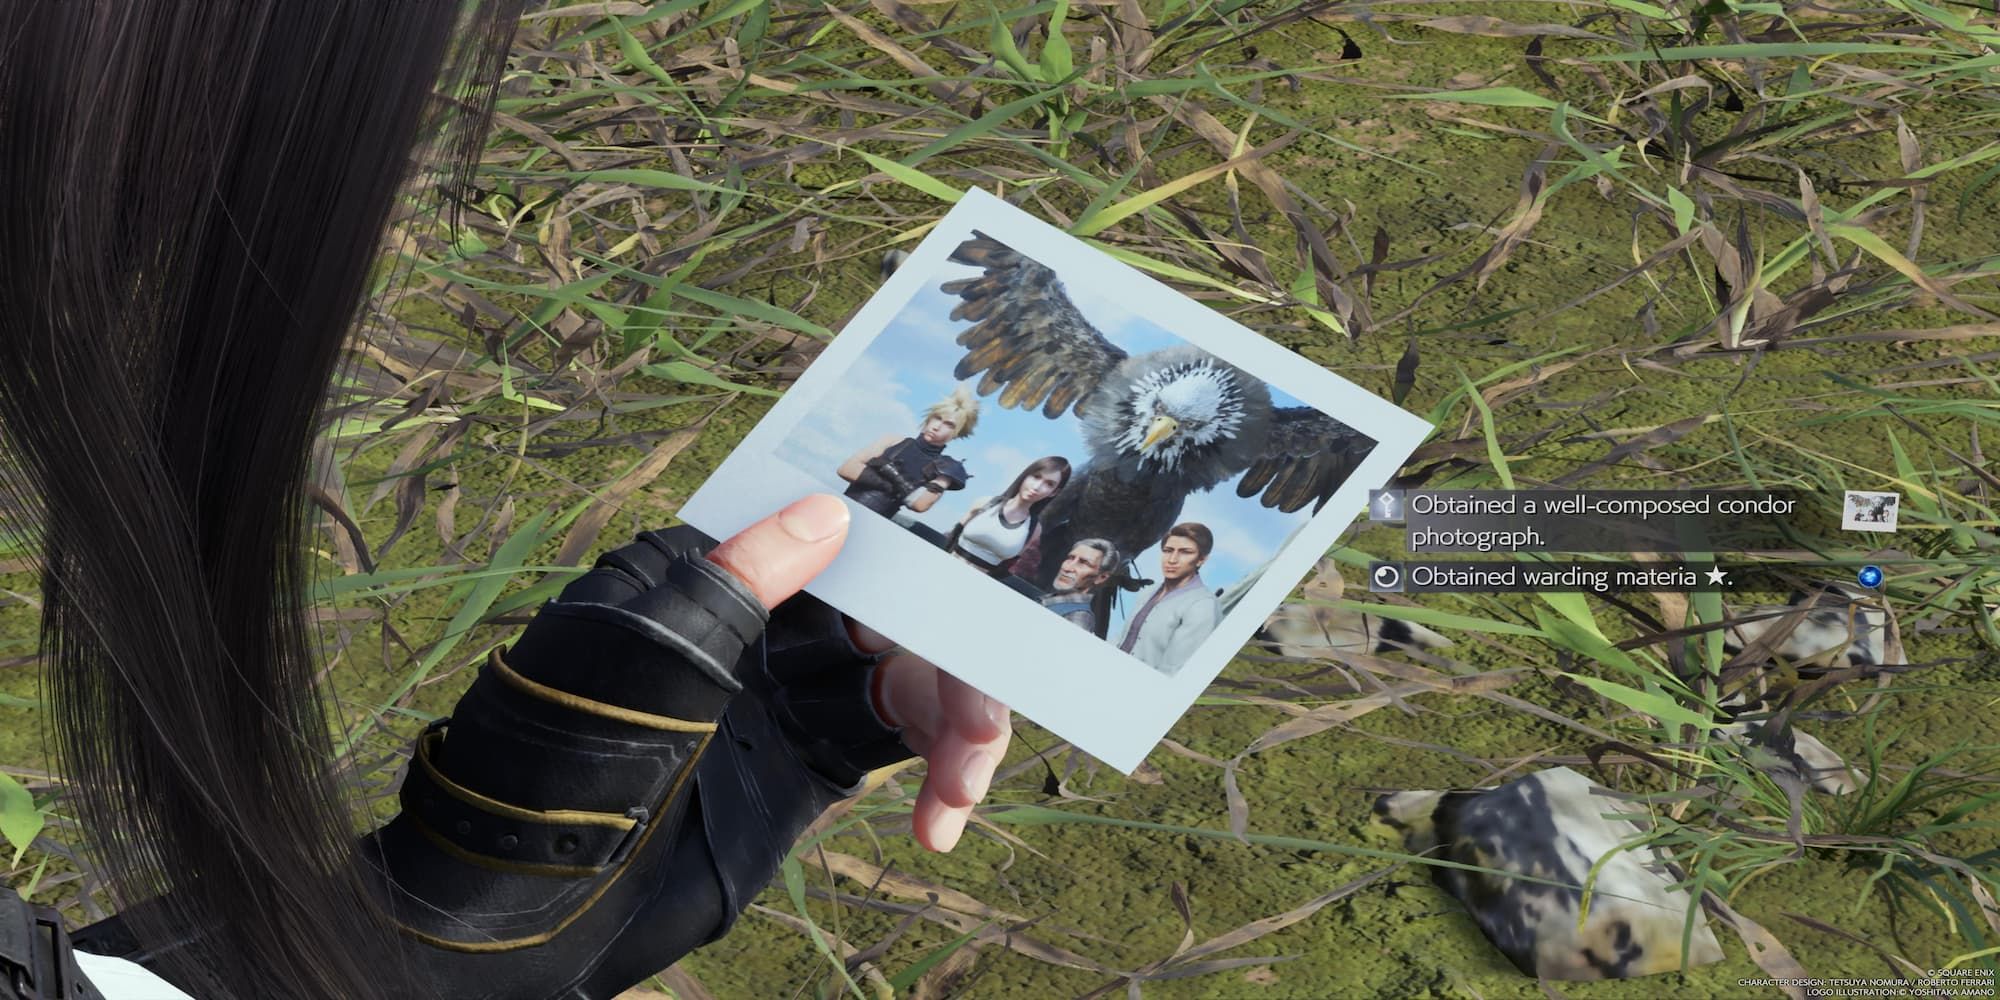 Tifa Holding A Well-Composed Condor Photograph,